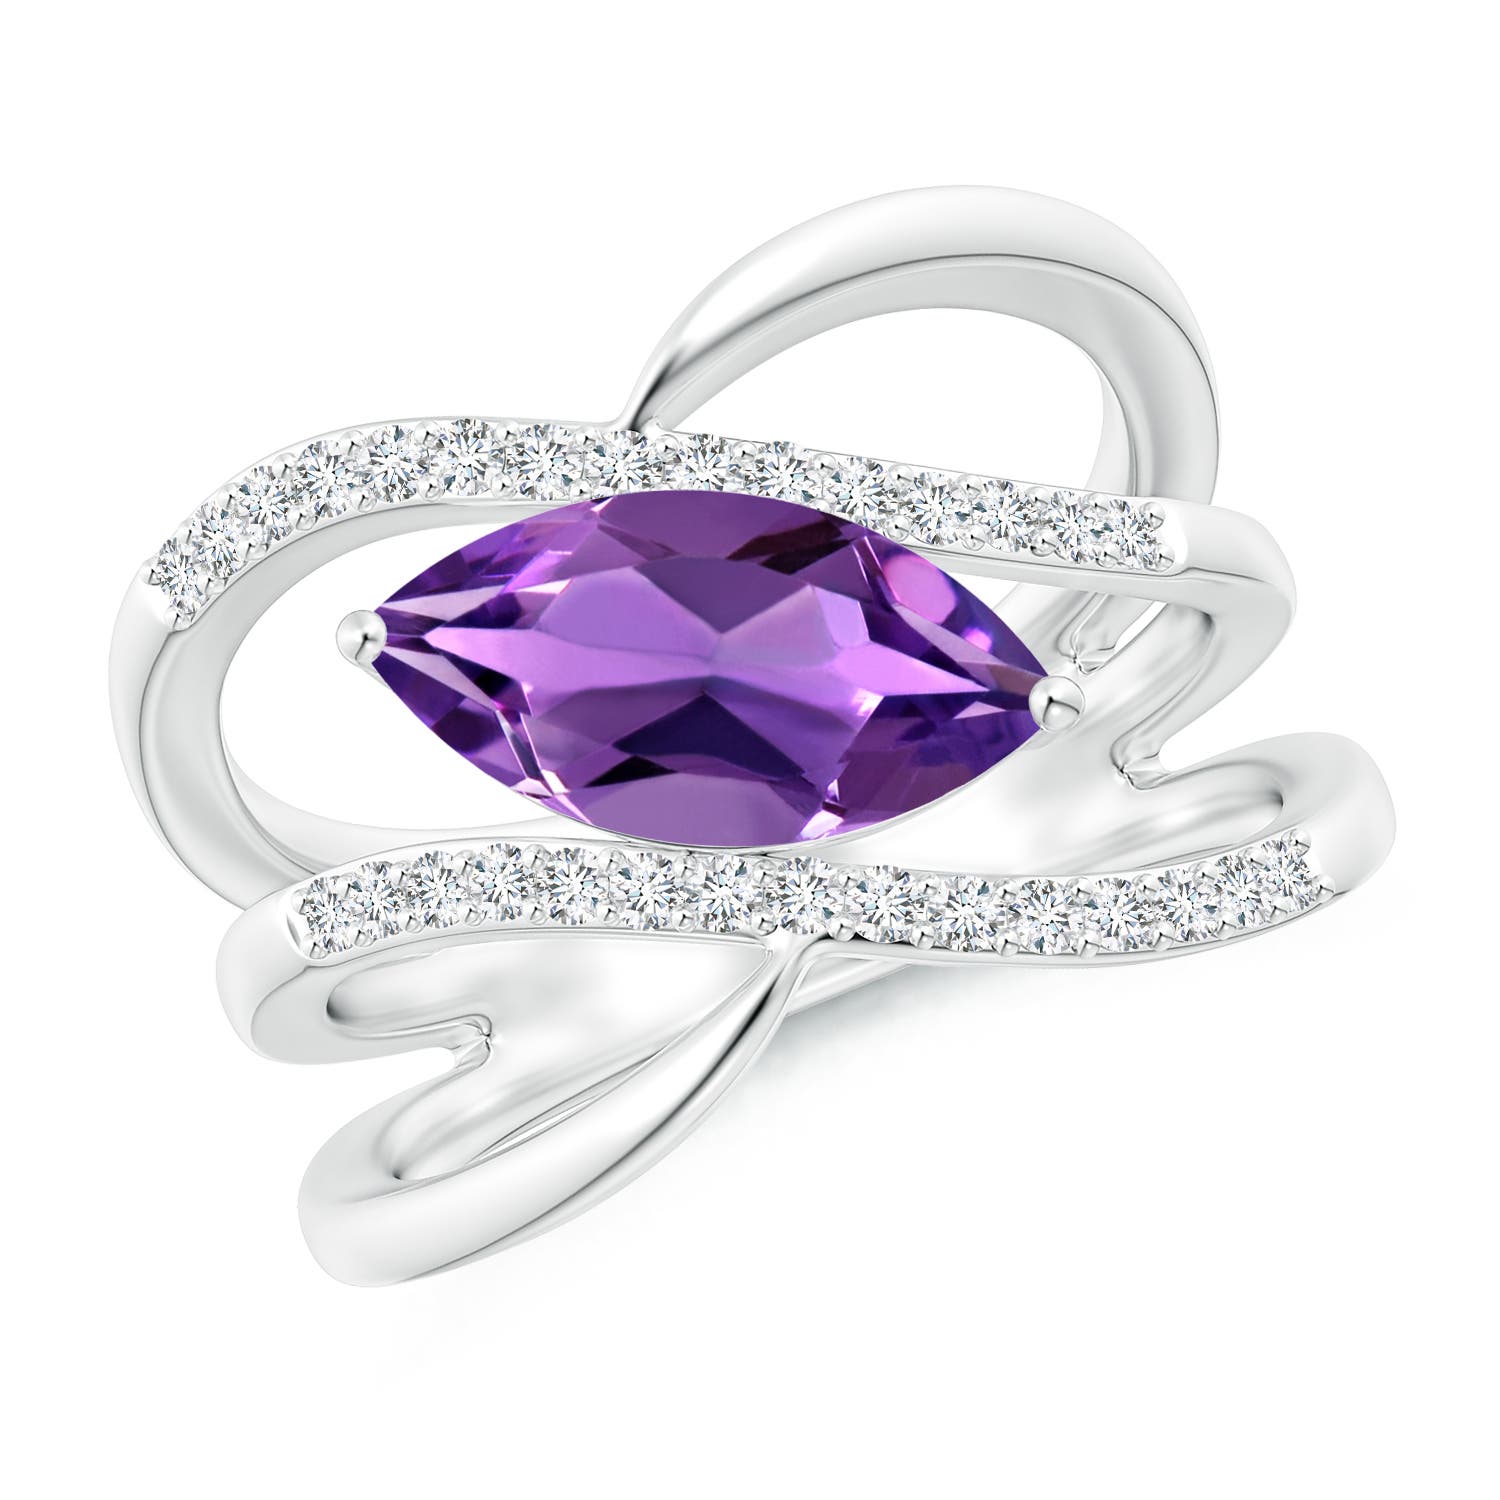 AAA - Amethyst / 1.54 CT / 14 KT White Gold